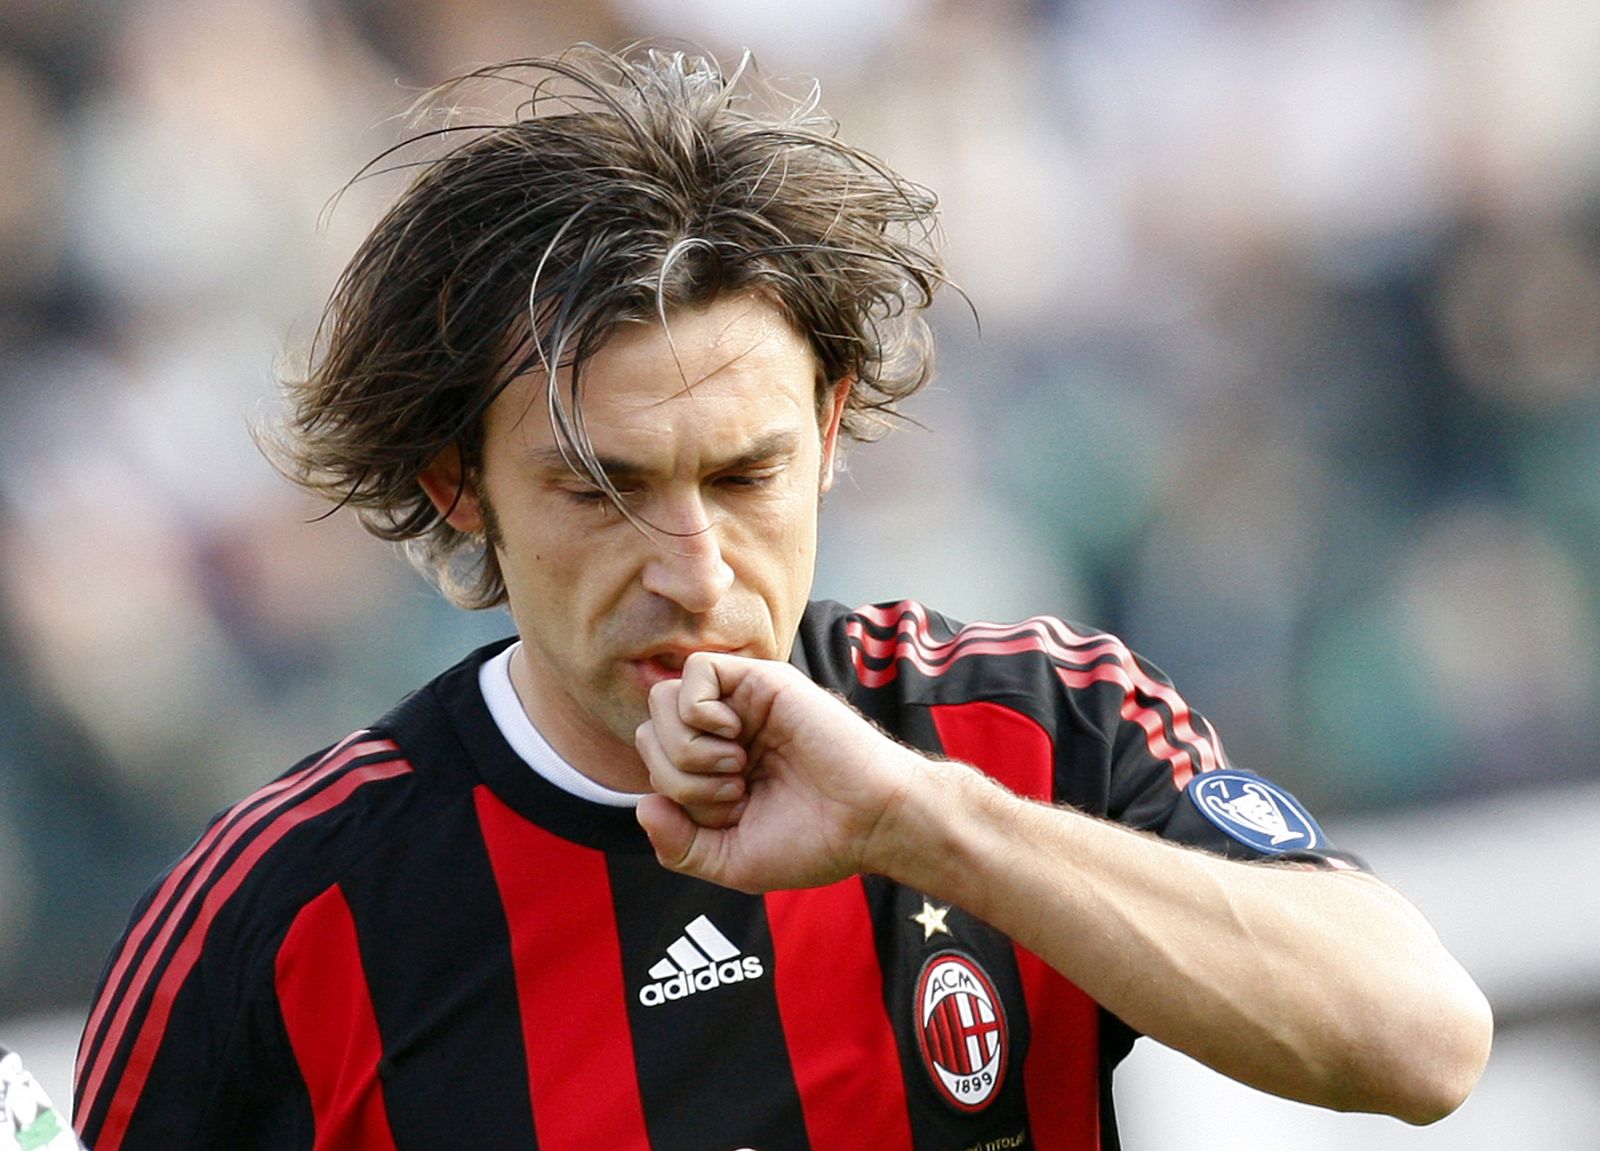 AC Milan's Pirlo celebrates after scoring a penalty against Siena during their Italian Serie A soccer match in Siena